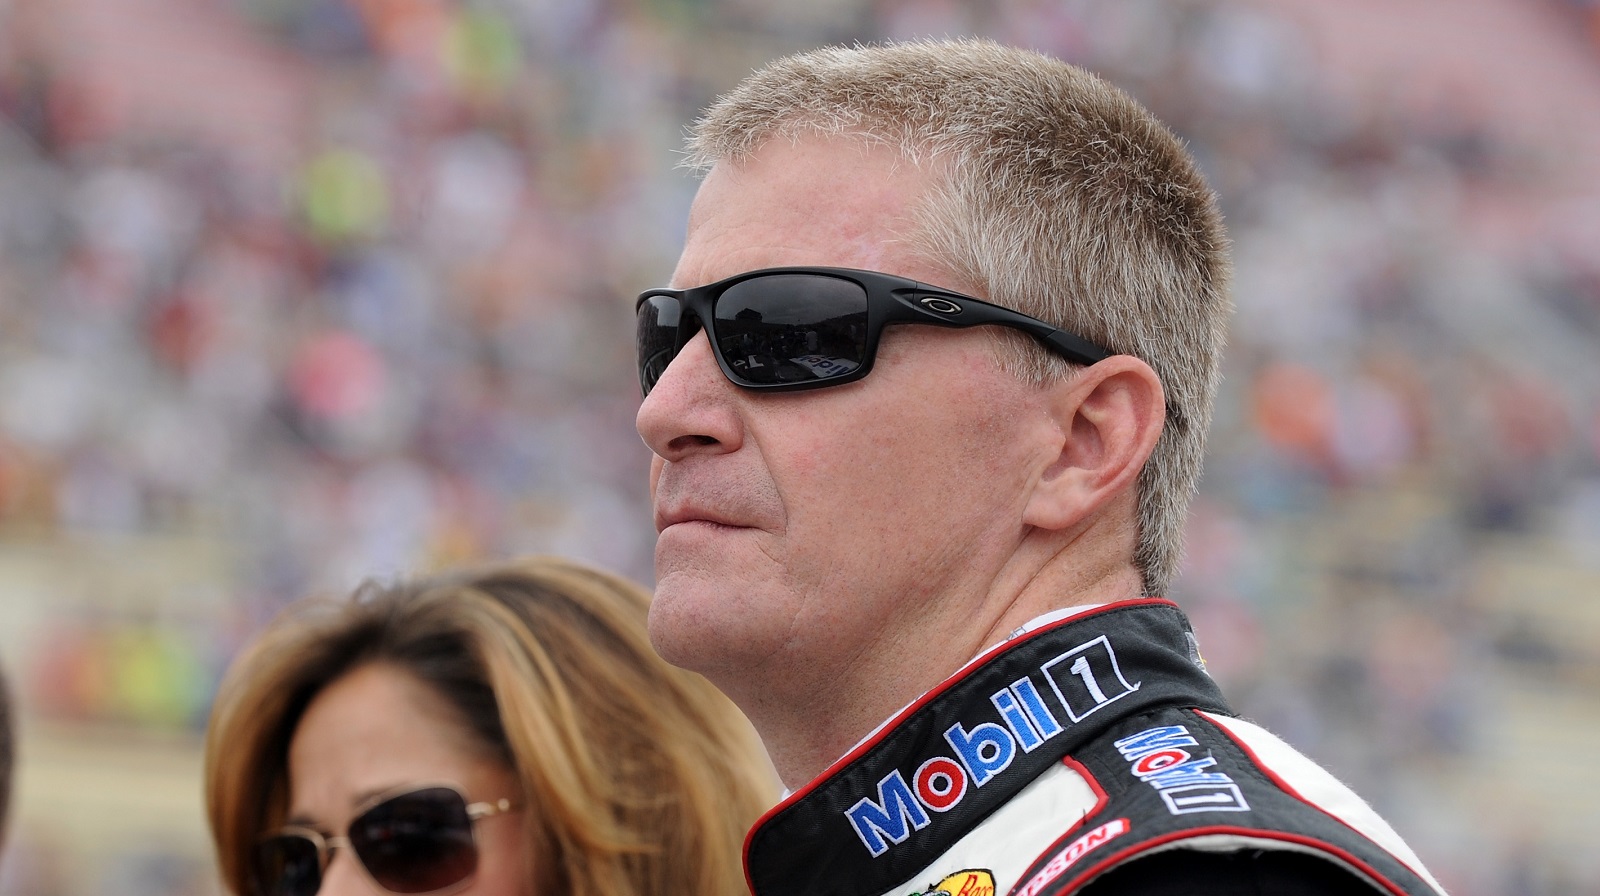 Jeff Burton stands on the grid prior to the NASCAR Sprint Cup Series Pure Michigan 400 at Michigan International Speedway on Aug. 17, 2014.